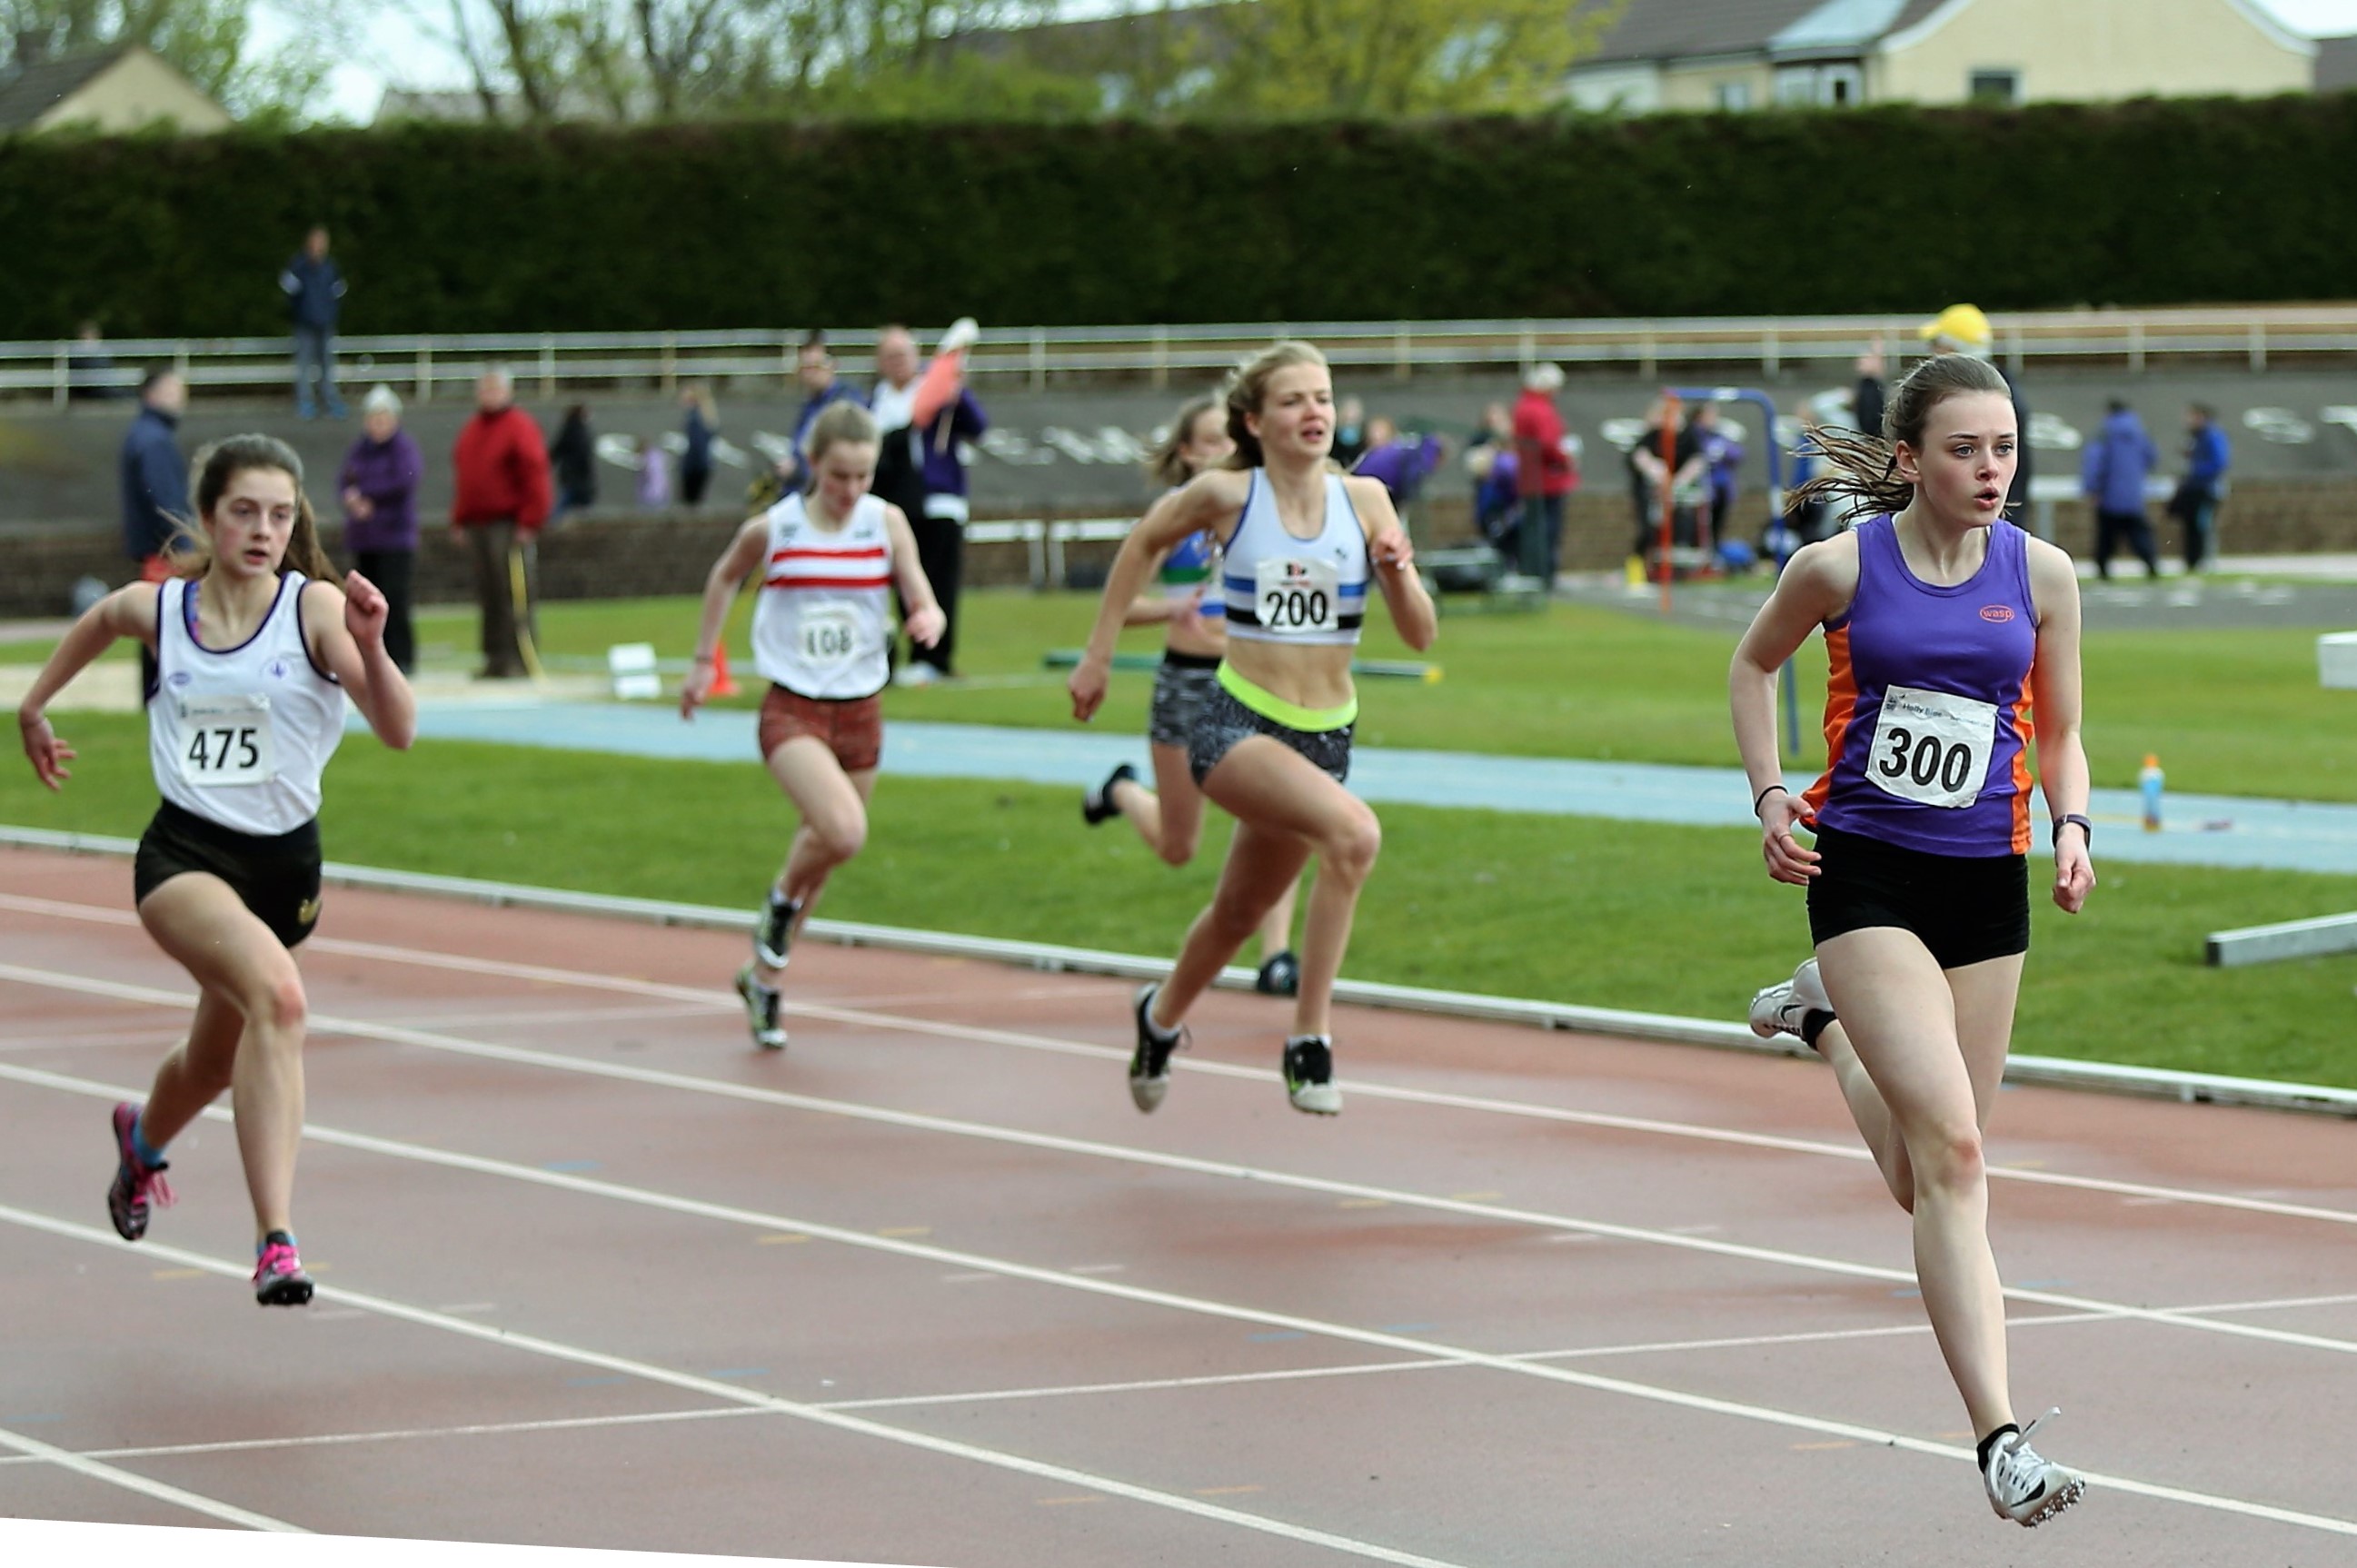 Shona McLay (300) showing fine form as she took a 200 metres win